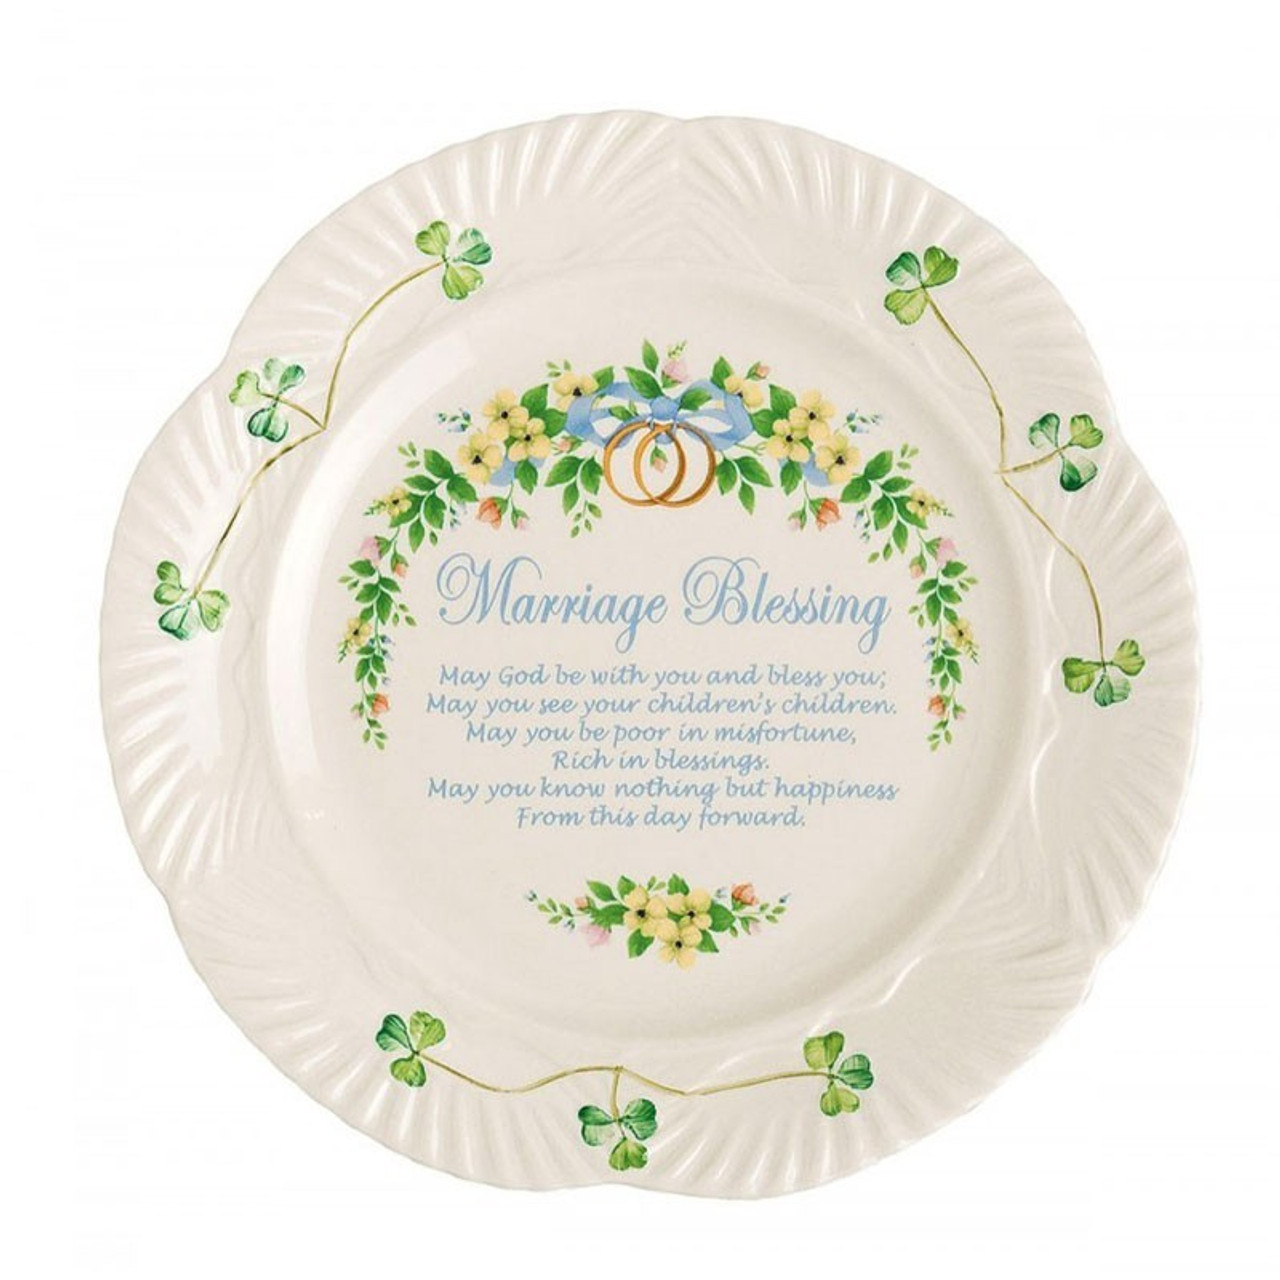 China 'Marriage Blessing' Plate 9" by Belleek